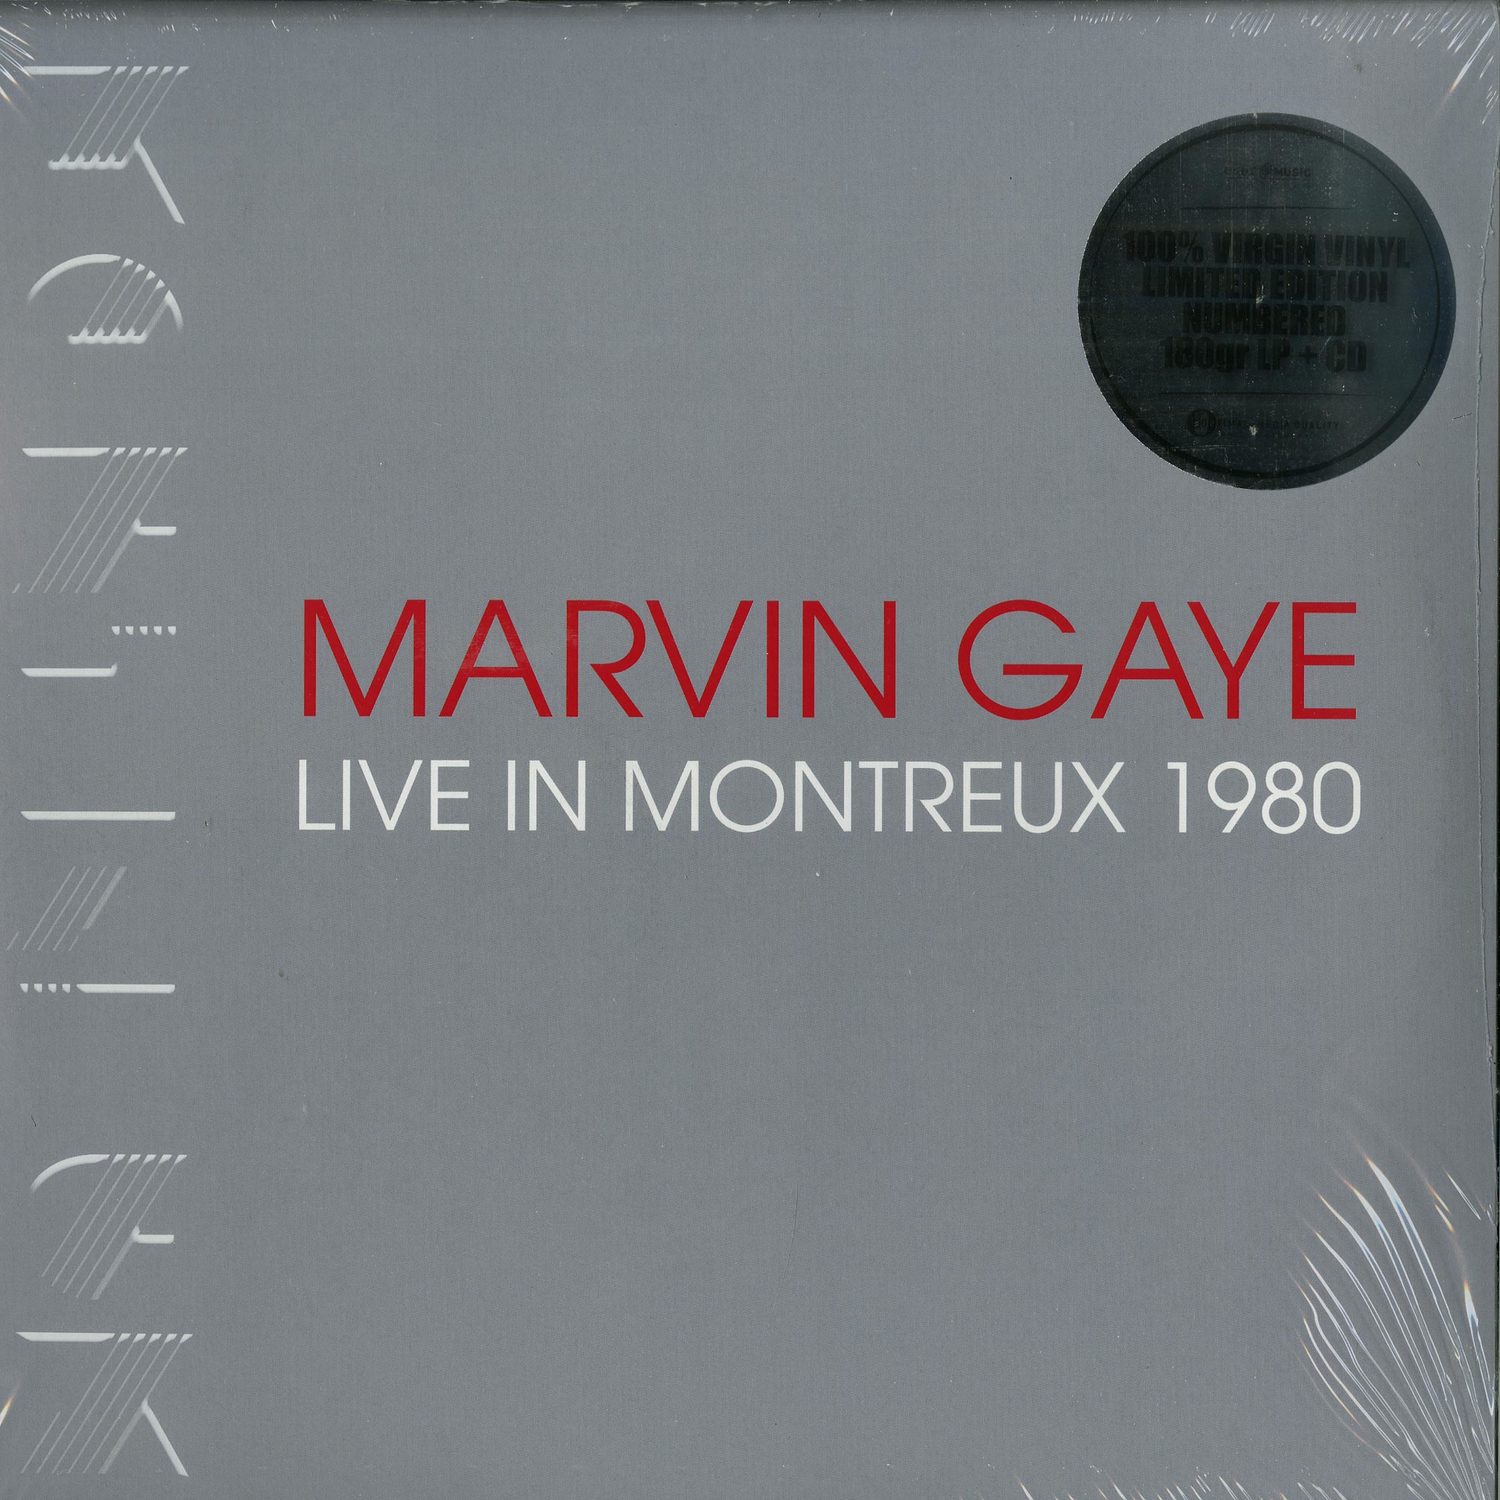 Marvin Gaye - LIVE IN MONTREUX 1980 